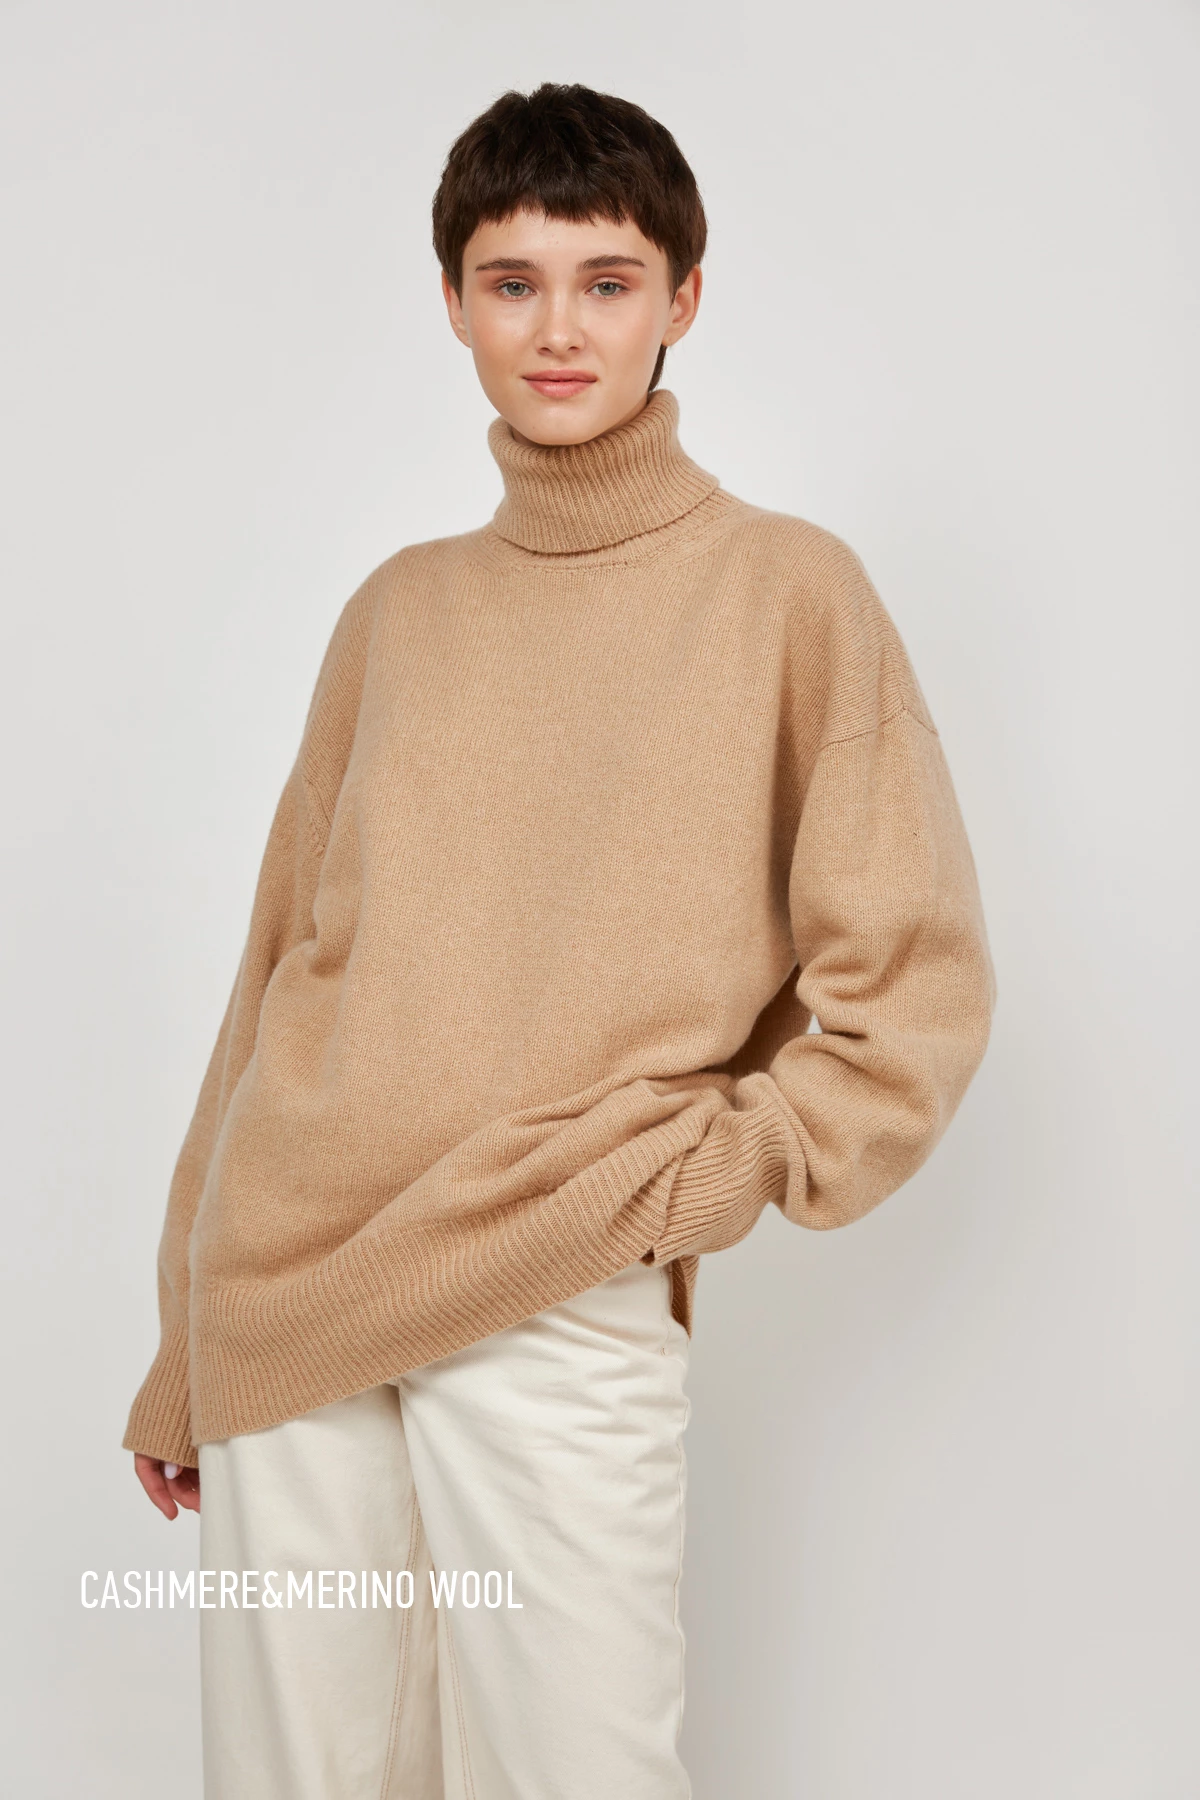 Cashmere beige knitted oversized sweater, photo 8